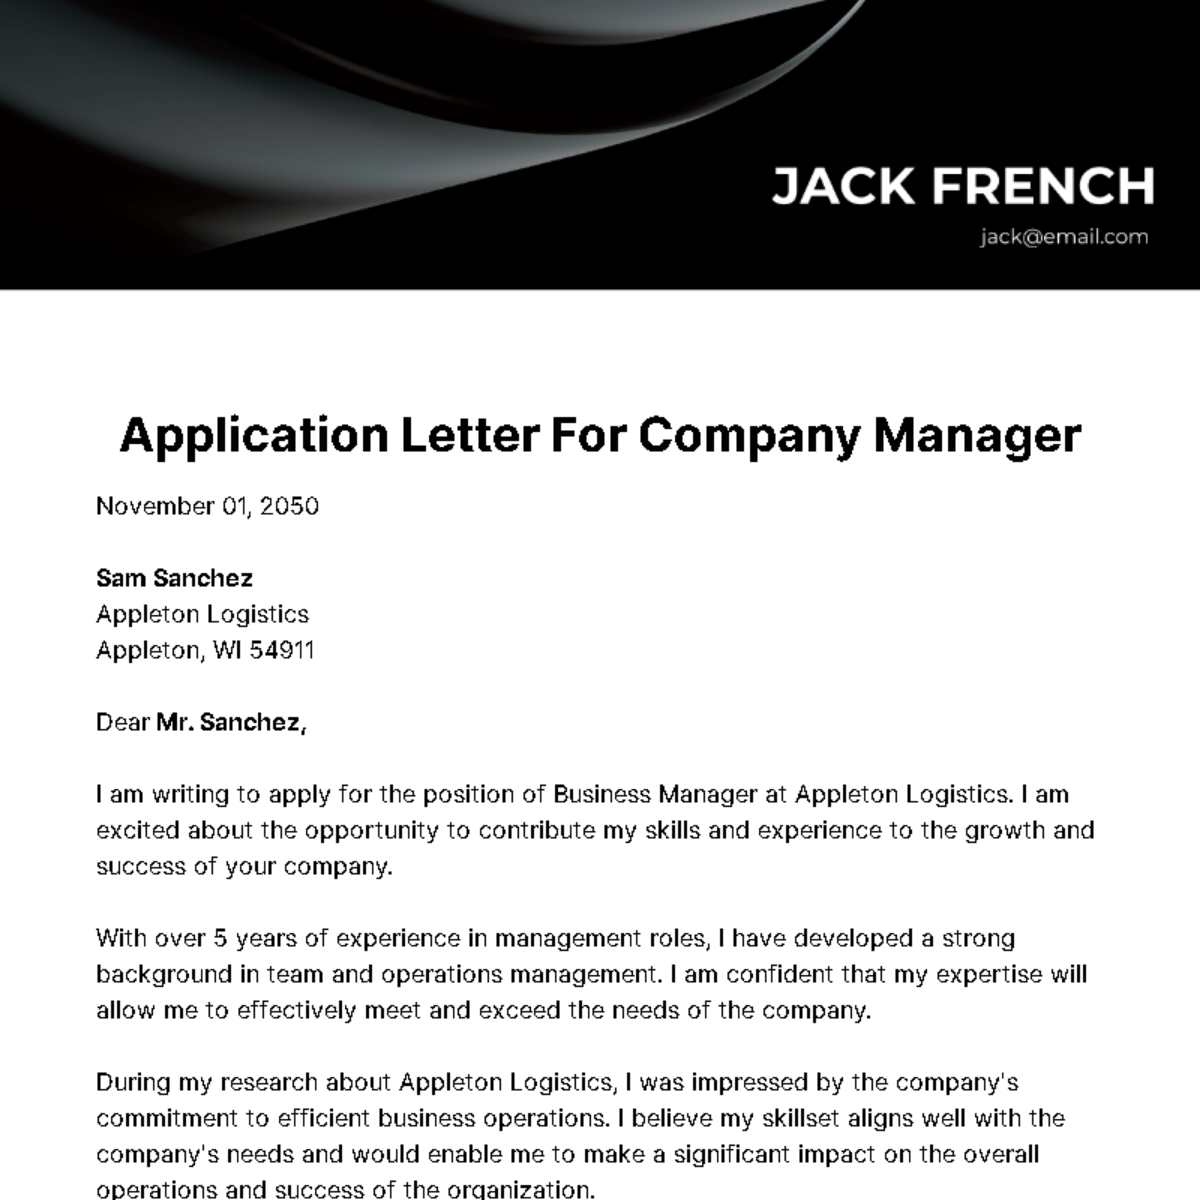 Application Letter for Company Manager Template